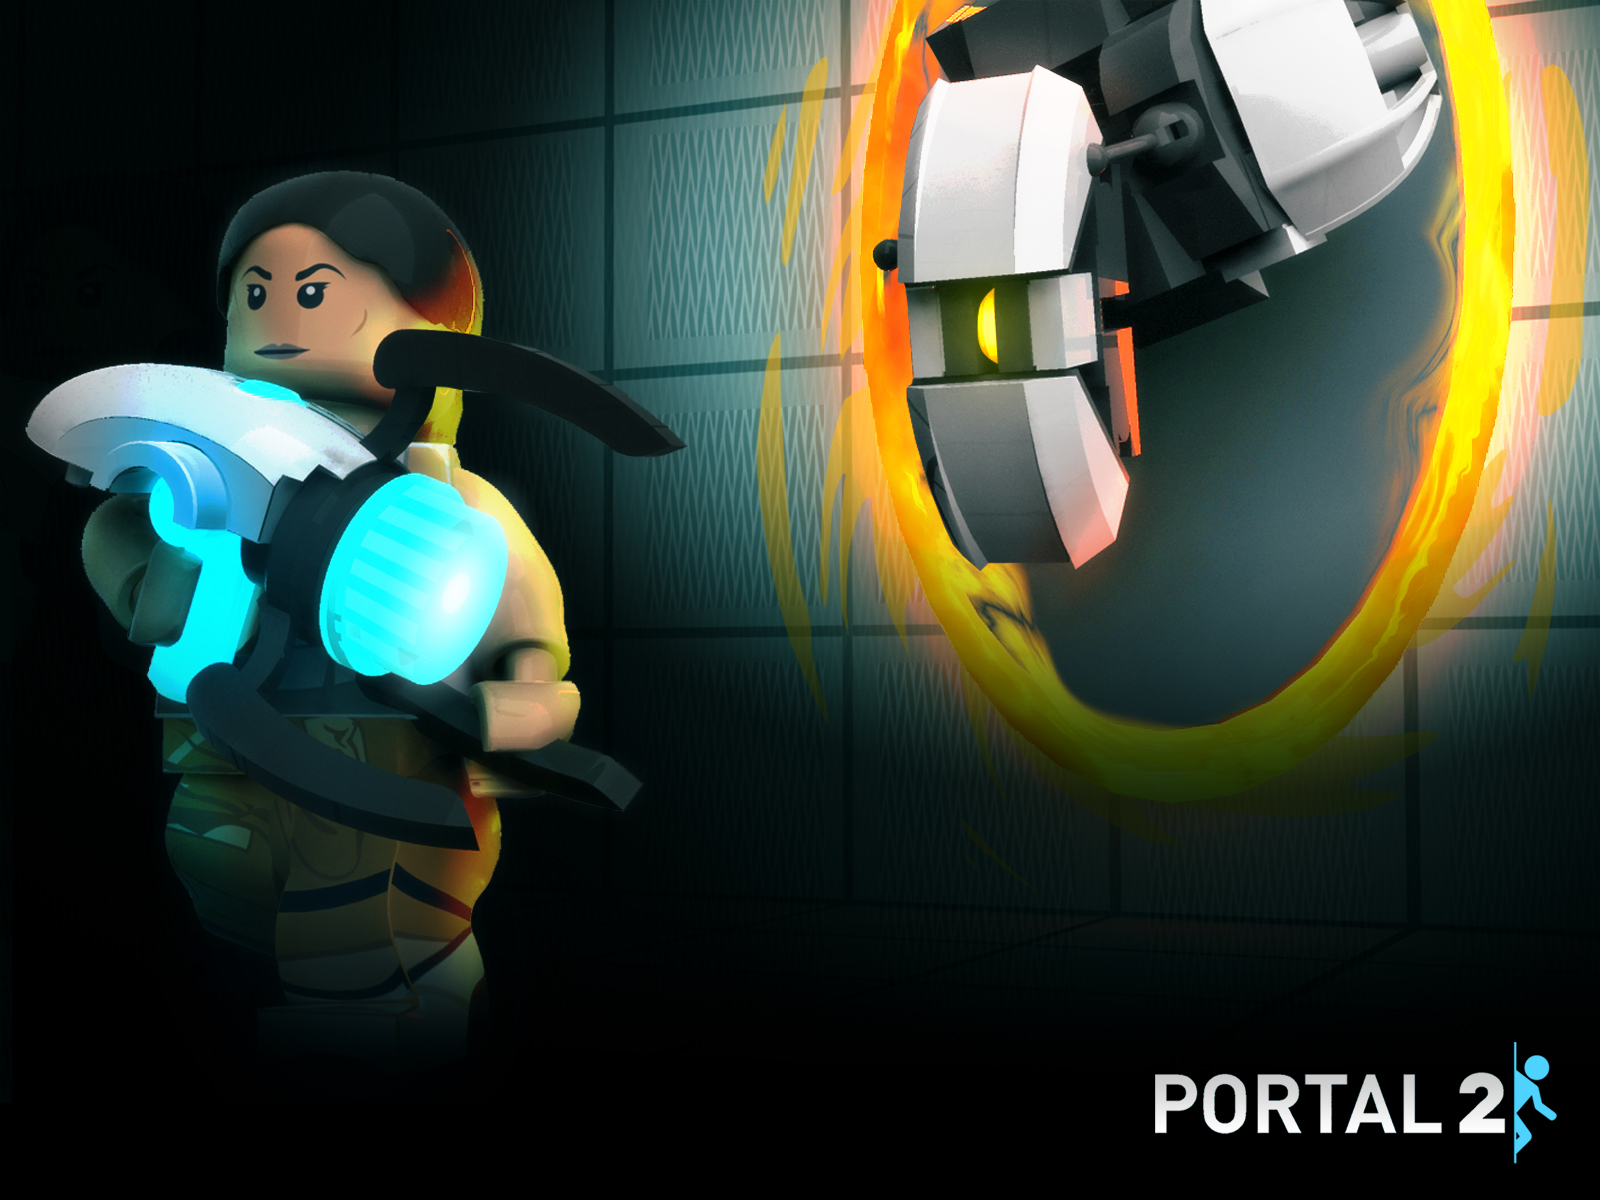 IDEAS - Thinking with Portals!